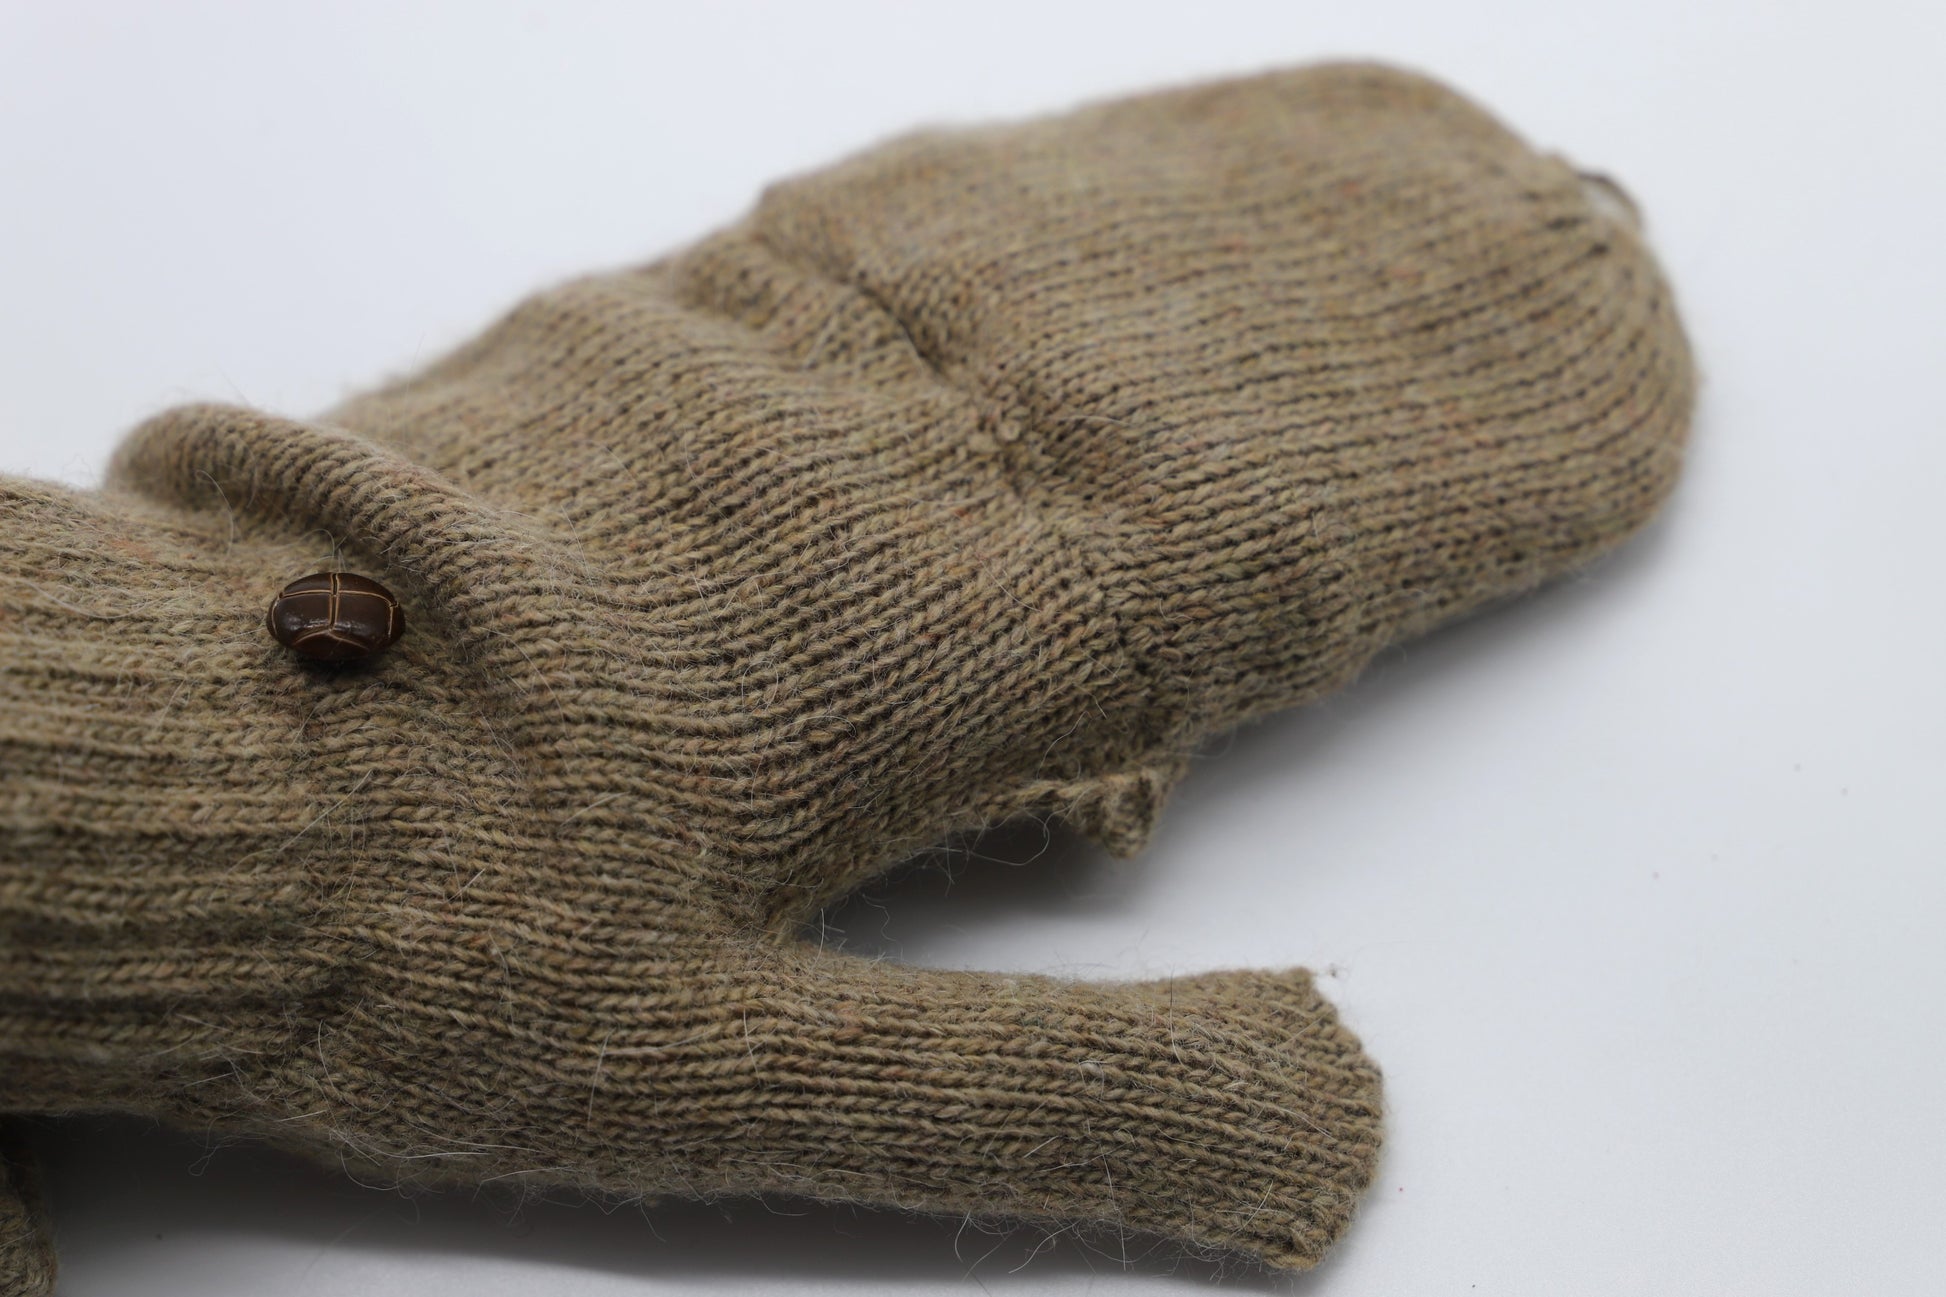 Warm Flip-Top Gloves for Women from Wool Blend - Taupe Brown - Scarf Designers